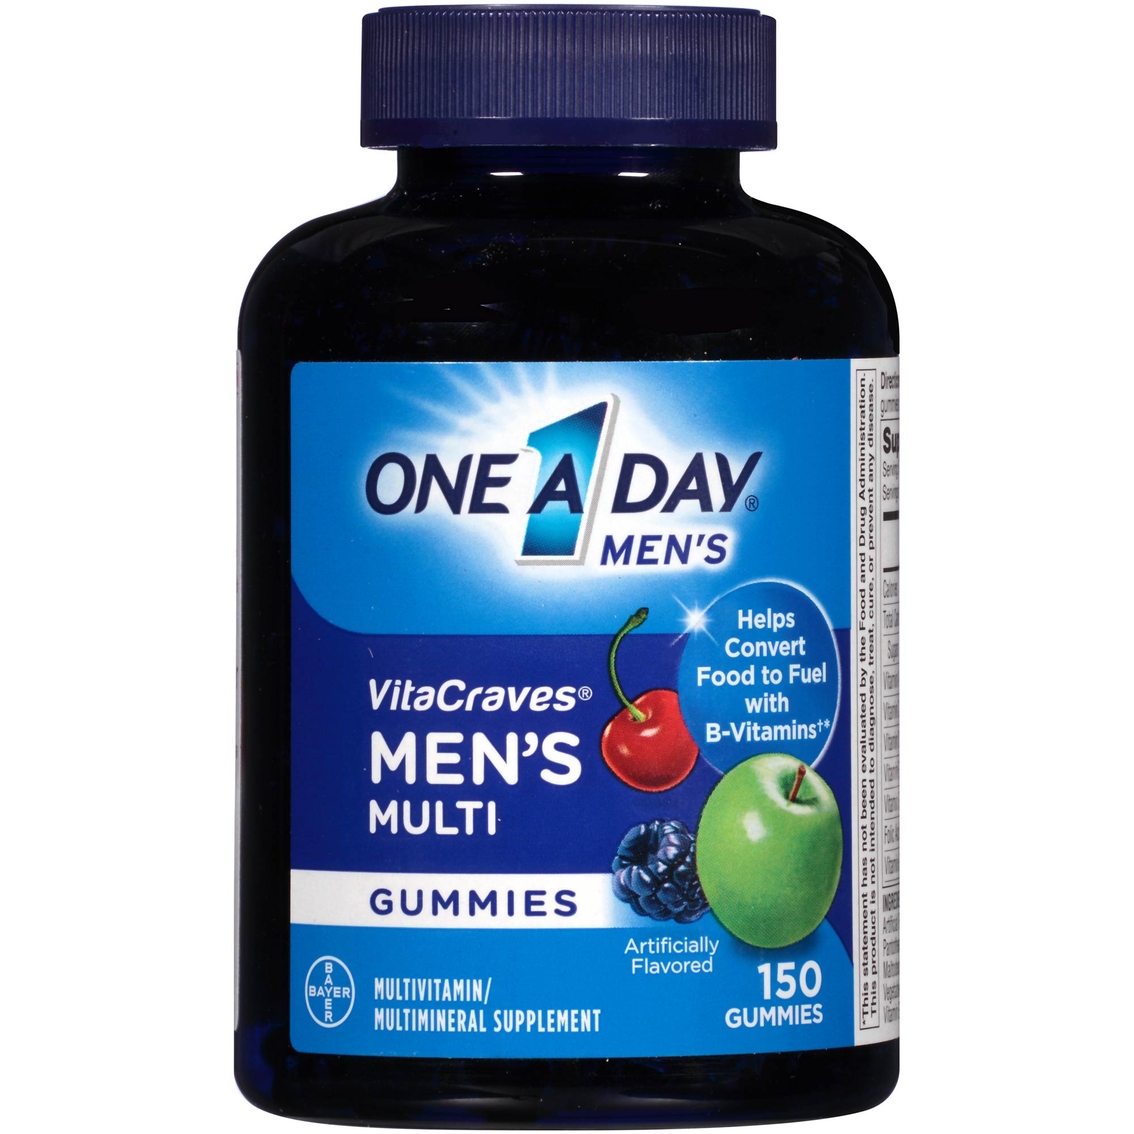 One A Day VitaCraves Men's Multivitamin/Multimineral Supplement Gummies 150 ct.